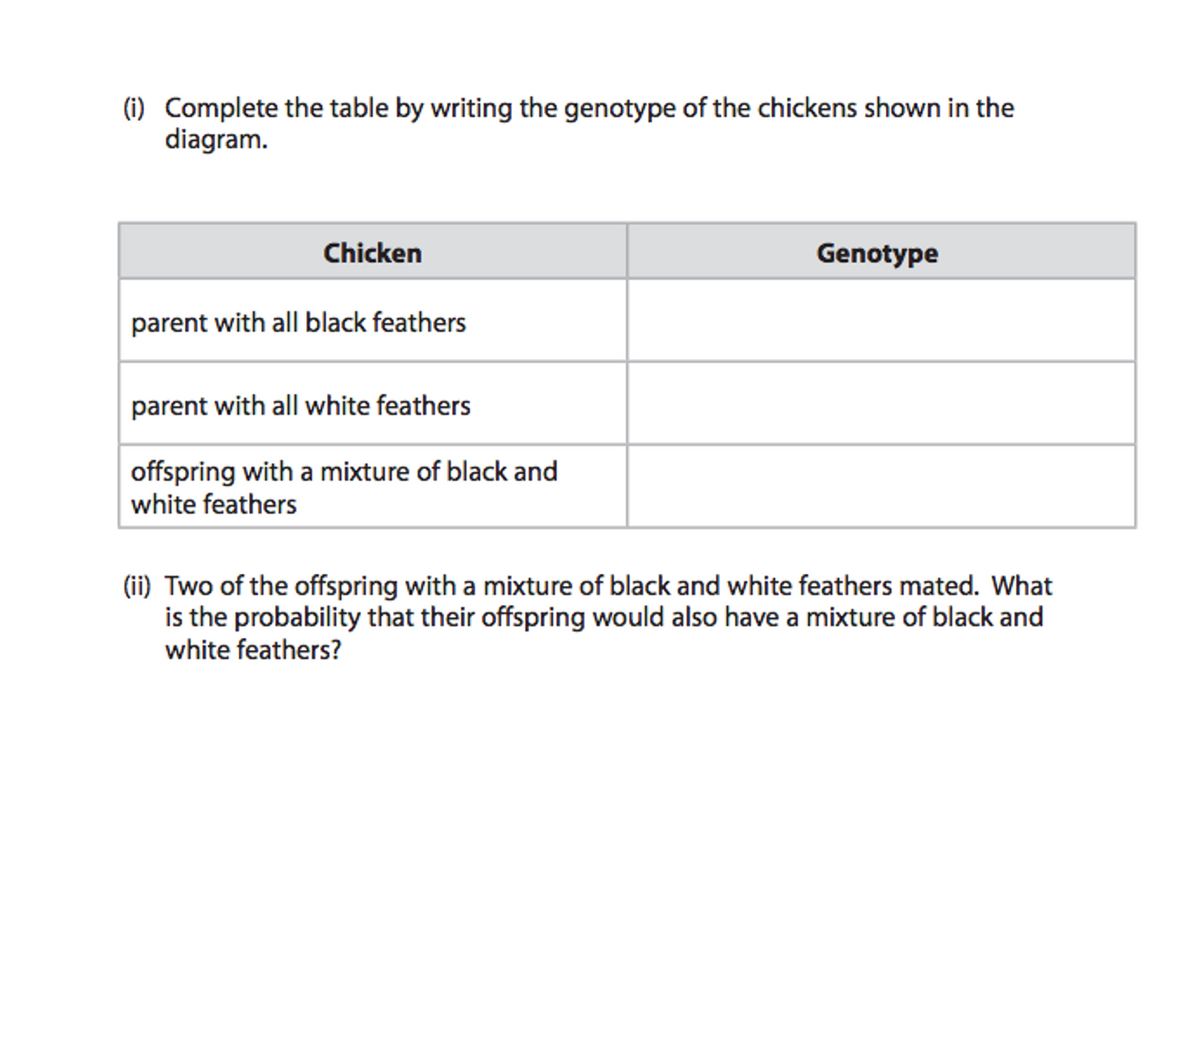 (i) Complete the table by writing the genotype of the chickens shown in the
diagram.
Chicken
Genotype
parent with all black feathers
parent with all white feathers
offspring with a mixture of black and
white feathers
(ii) Two of the offspring with a mixture of black and white feathers mated. What
is the probability that their offspring would also have a mixture of black and
white feathers?
